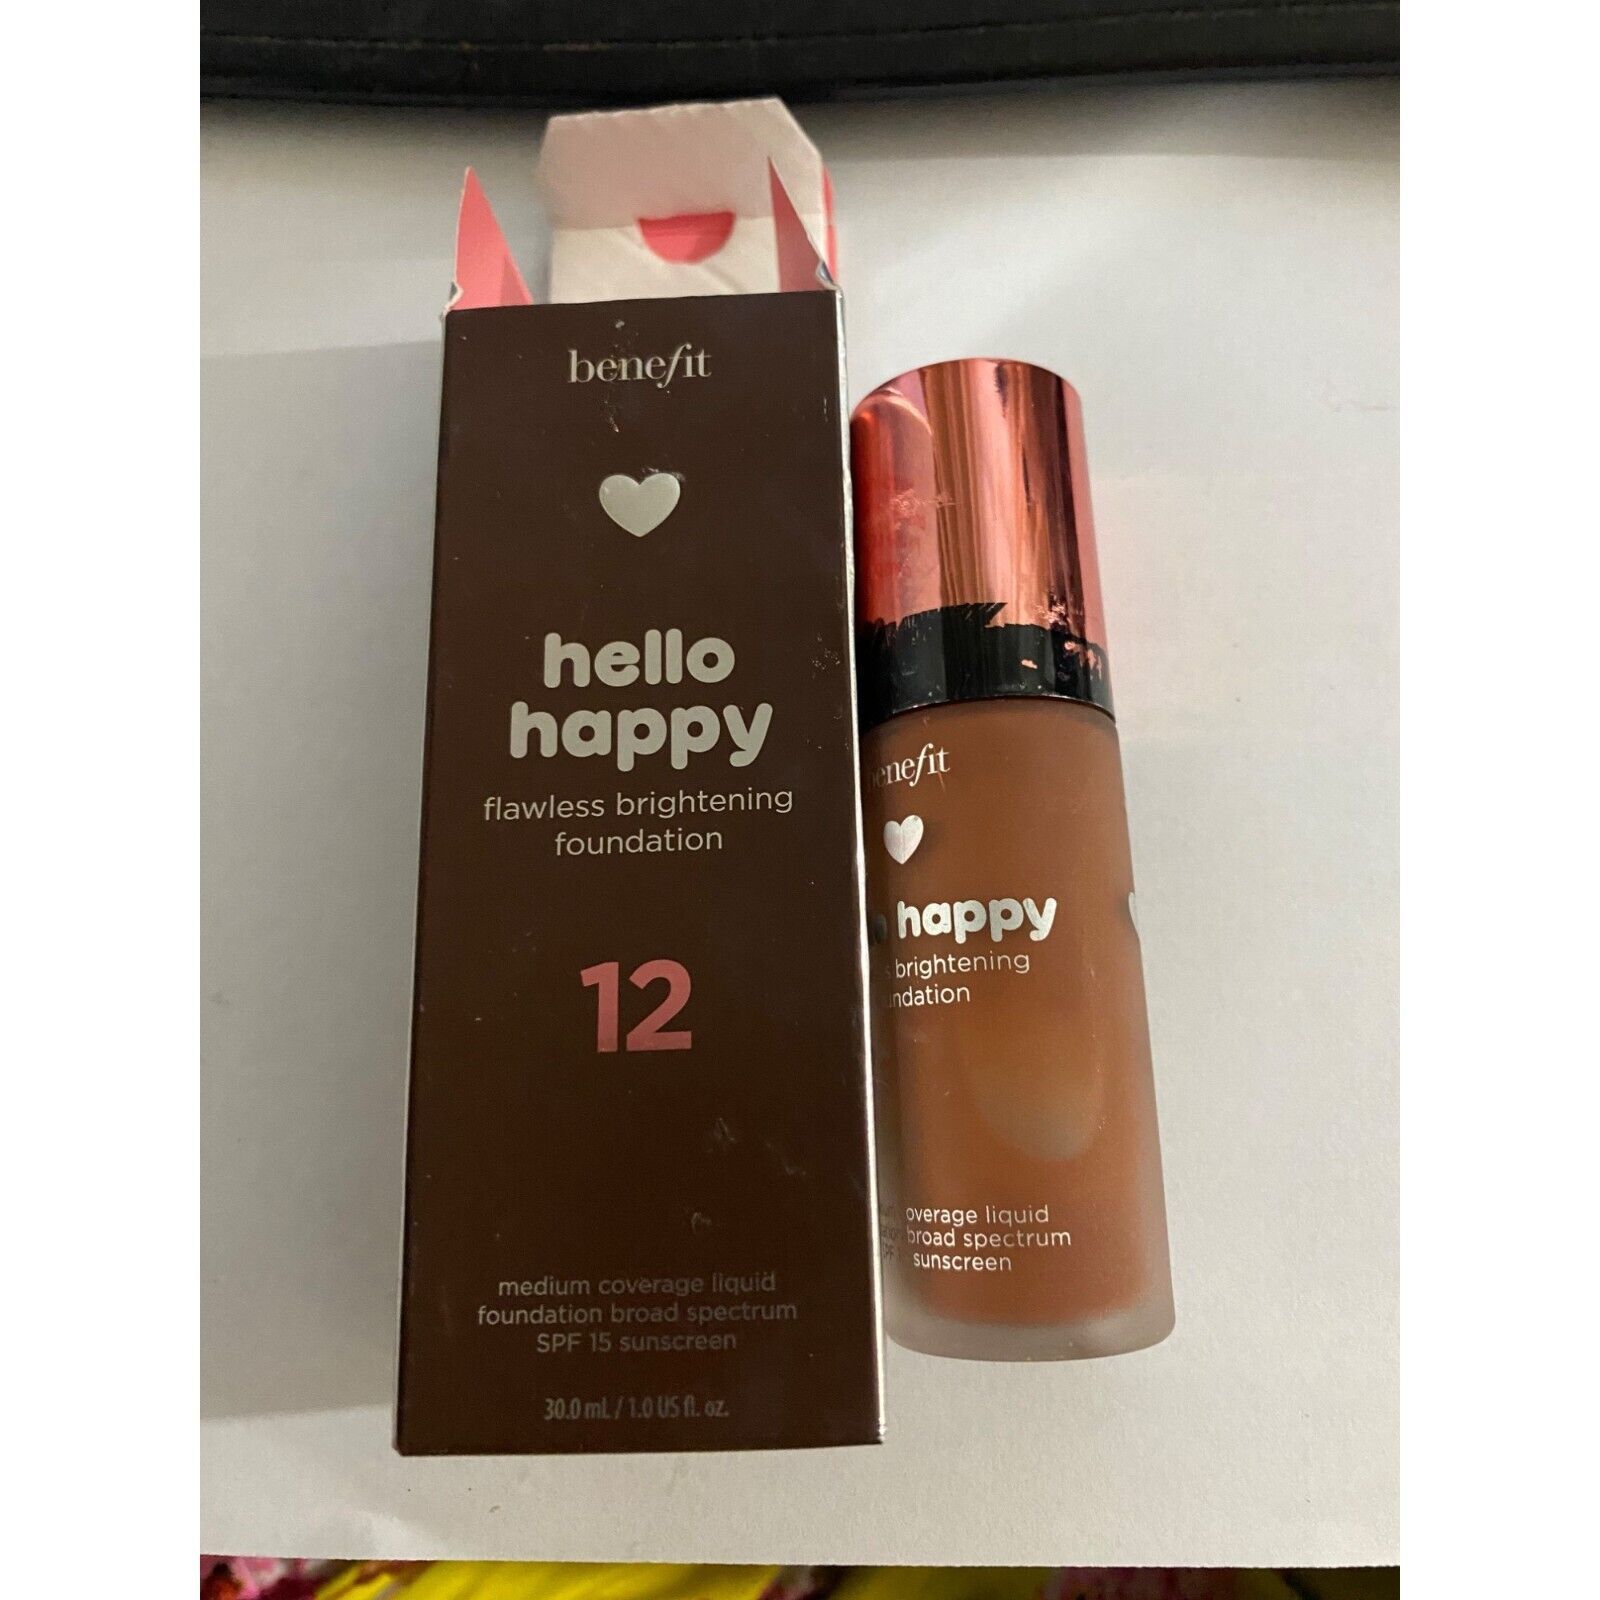 Primary image for Benefit Hello Happy flawless Brightening Foundation 12